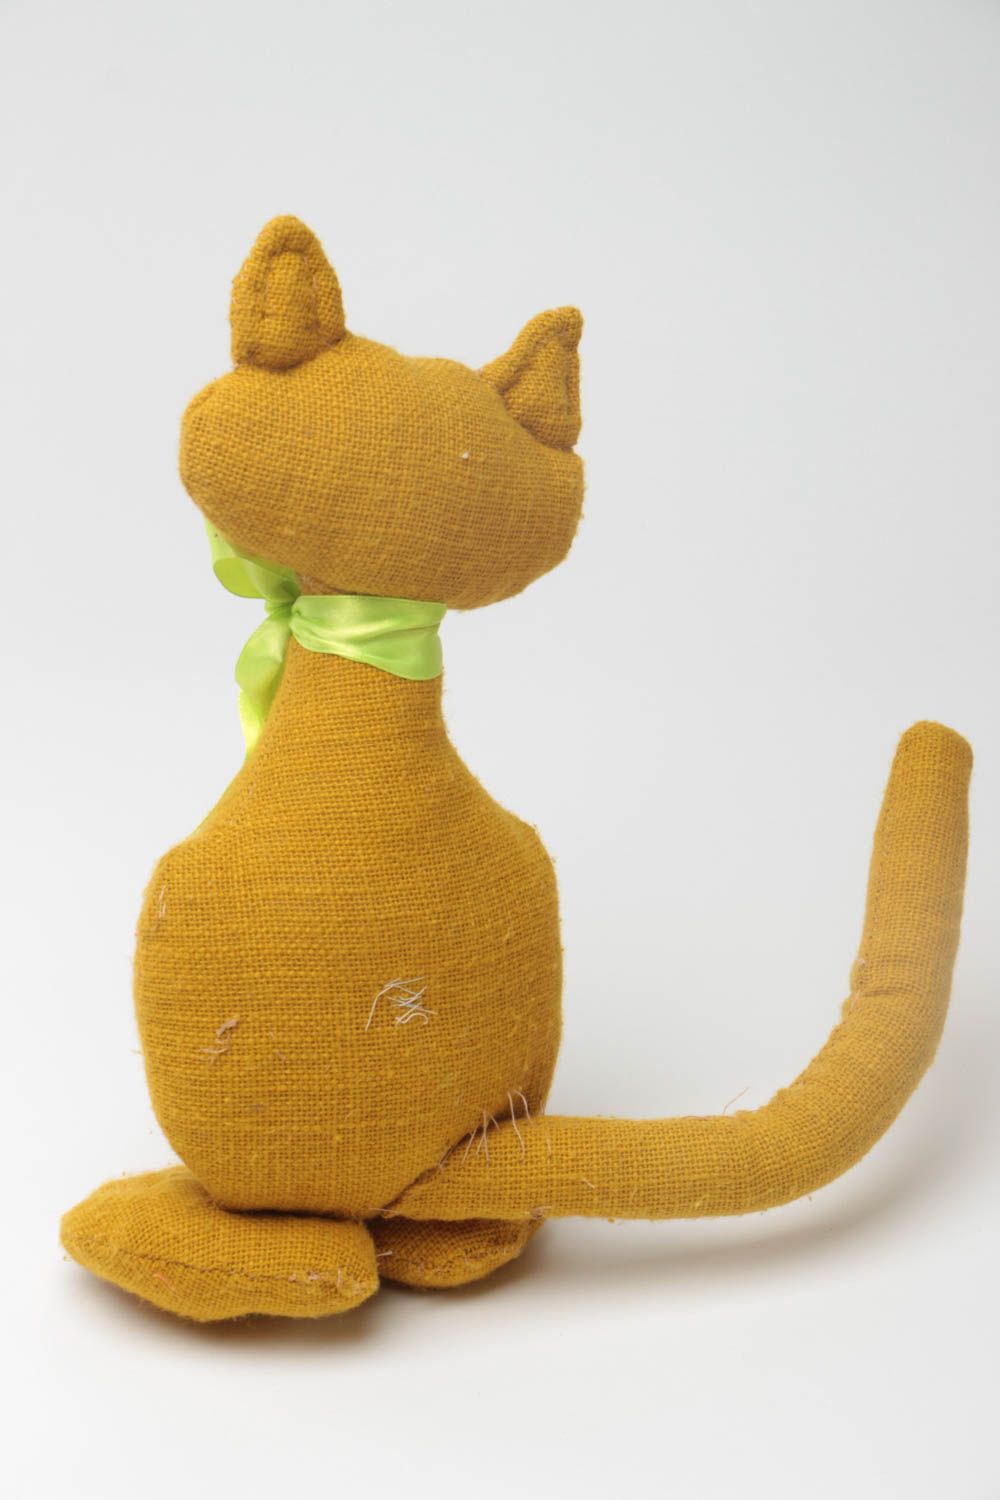 Handmade designer fabric soft toy burlap cat with buttons and bow for children photo 4